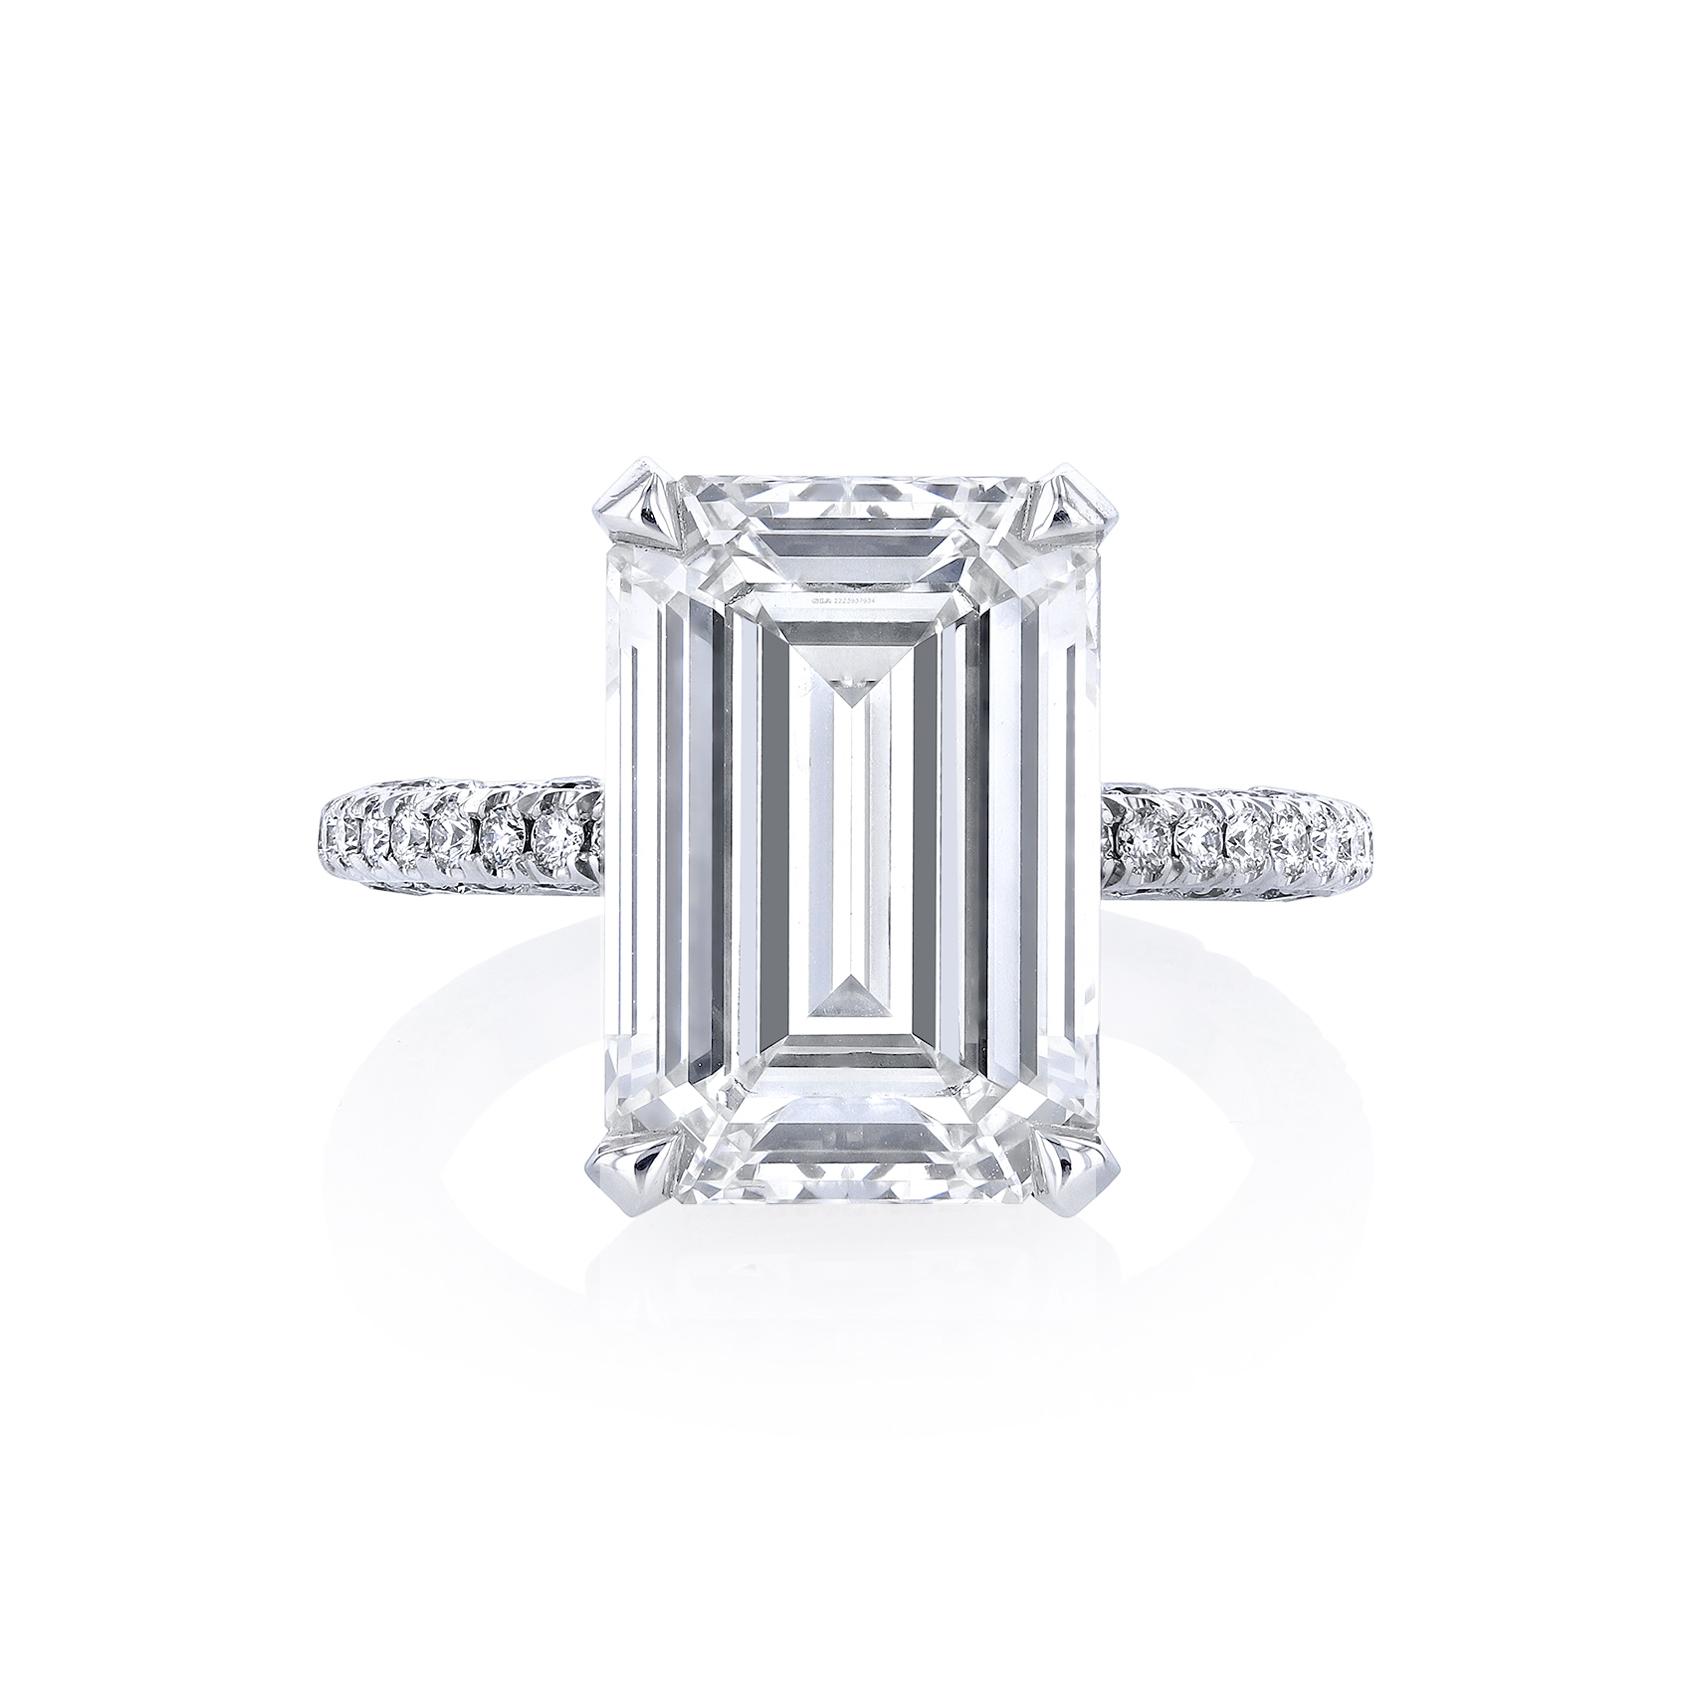 8.36 CT Emerald Cut Diamond Engagement Ring with Pave Band